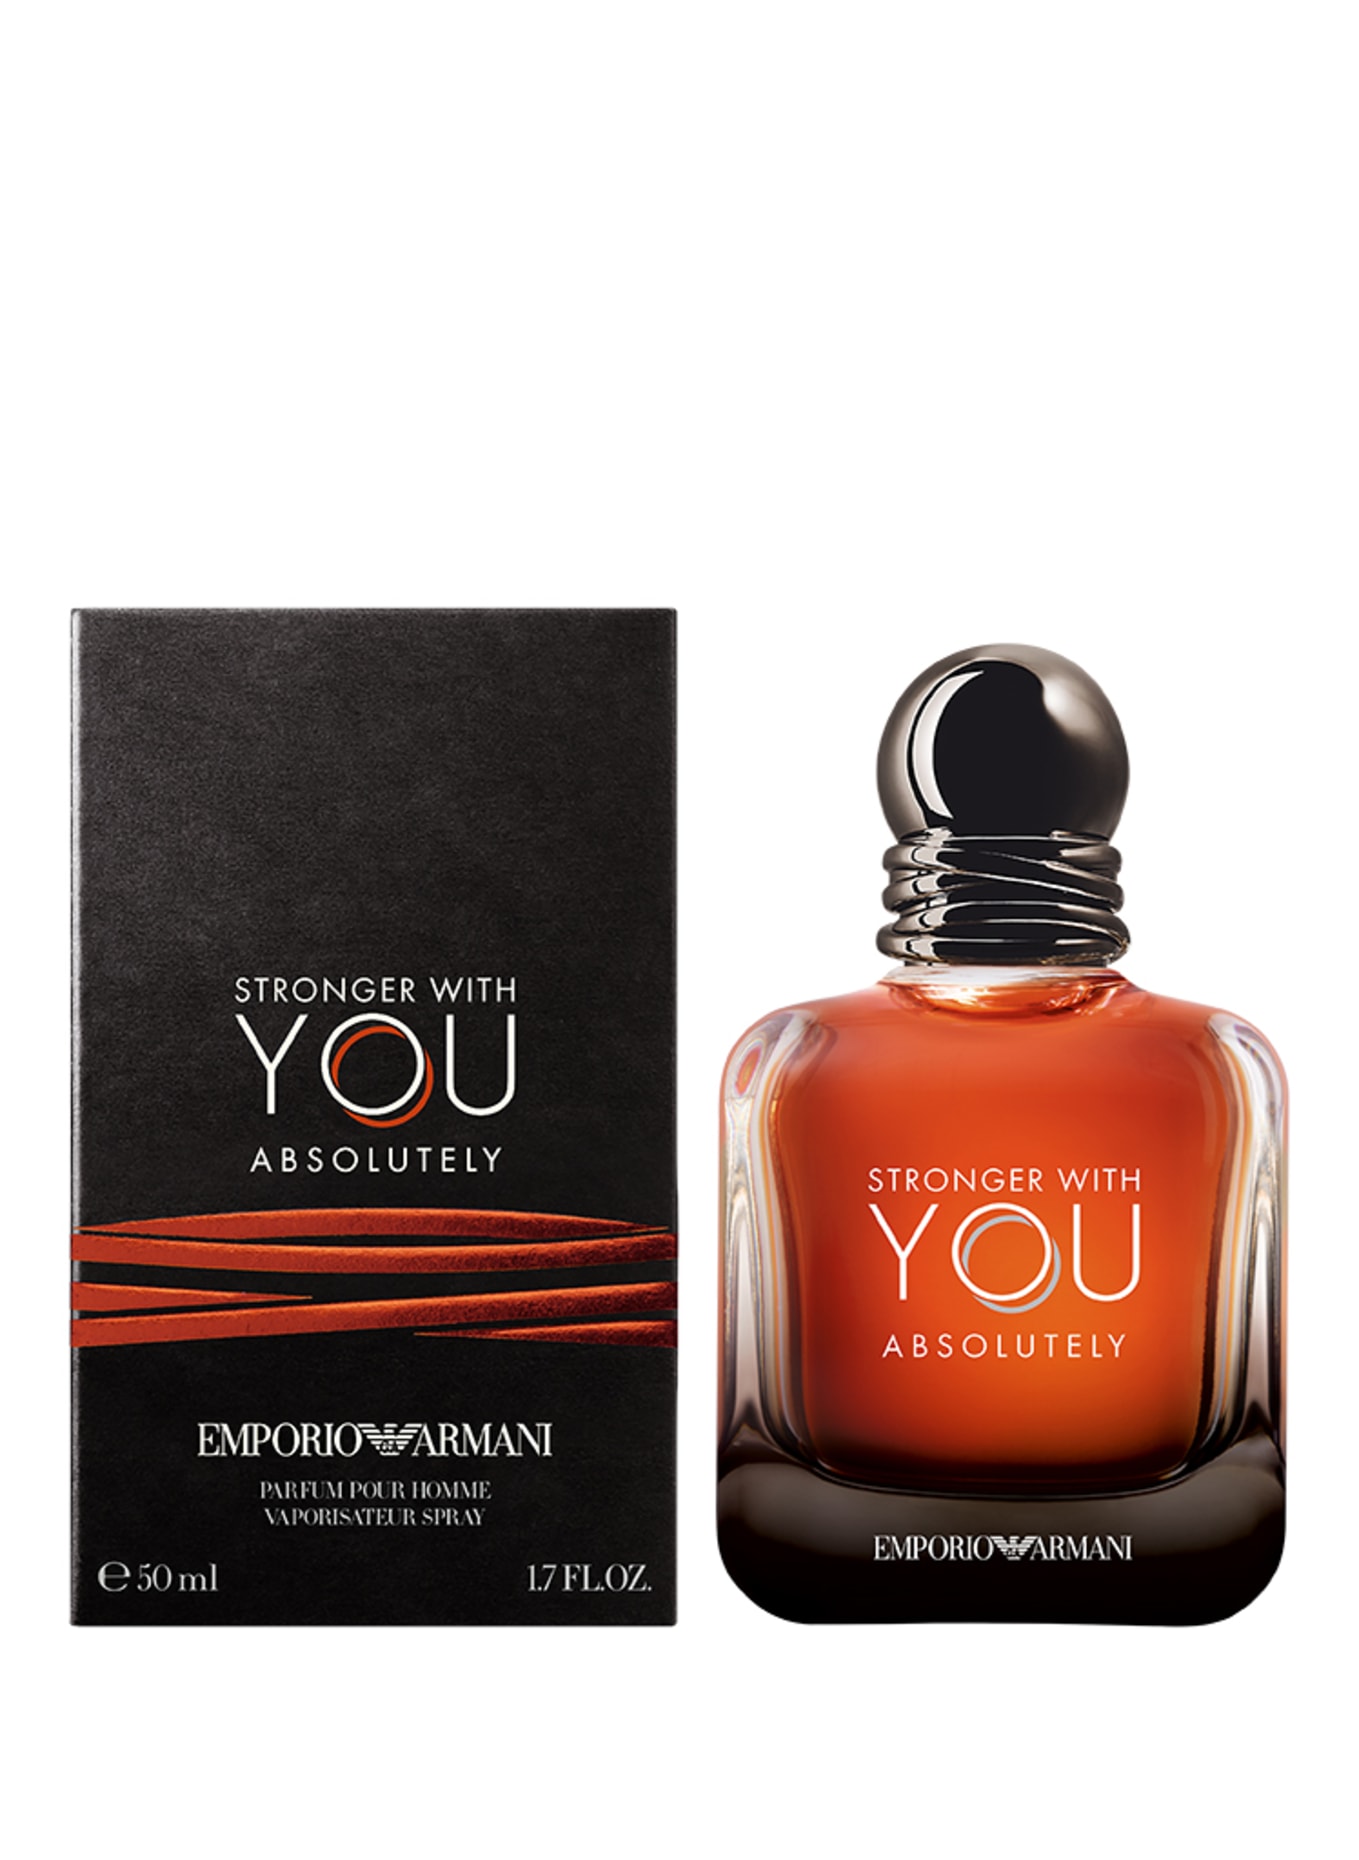 EMPORIO ARMANI STRONGER WITH YOU ABSOLUTELY (Bild 2)